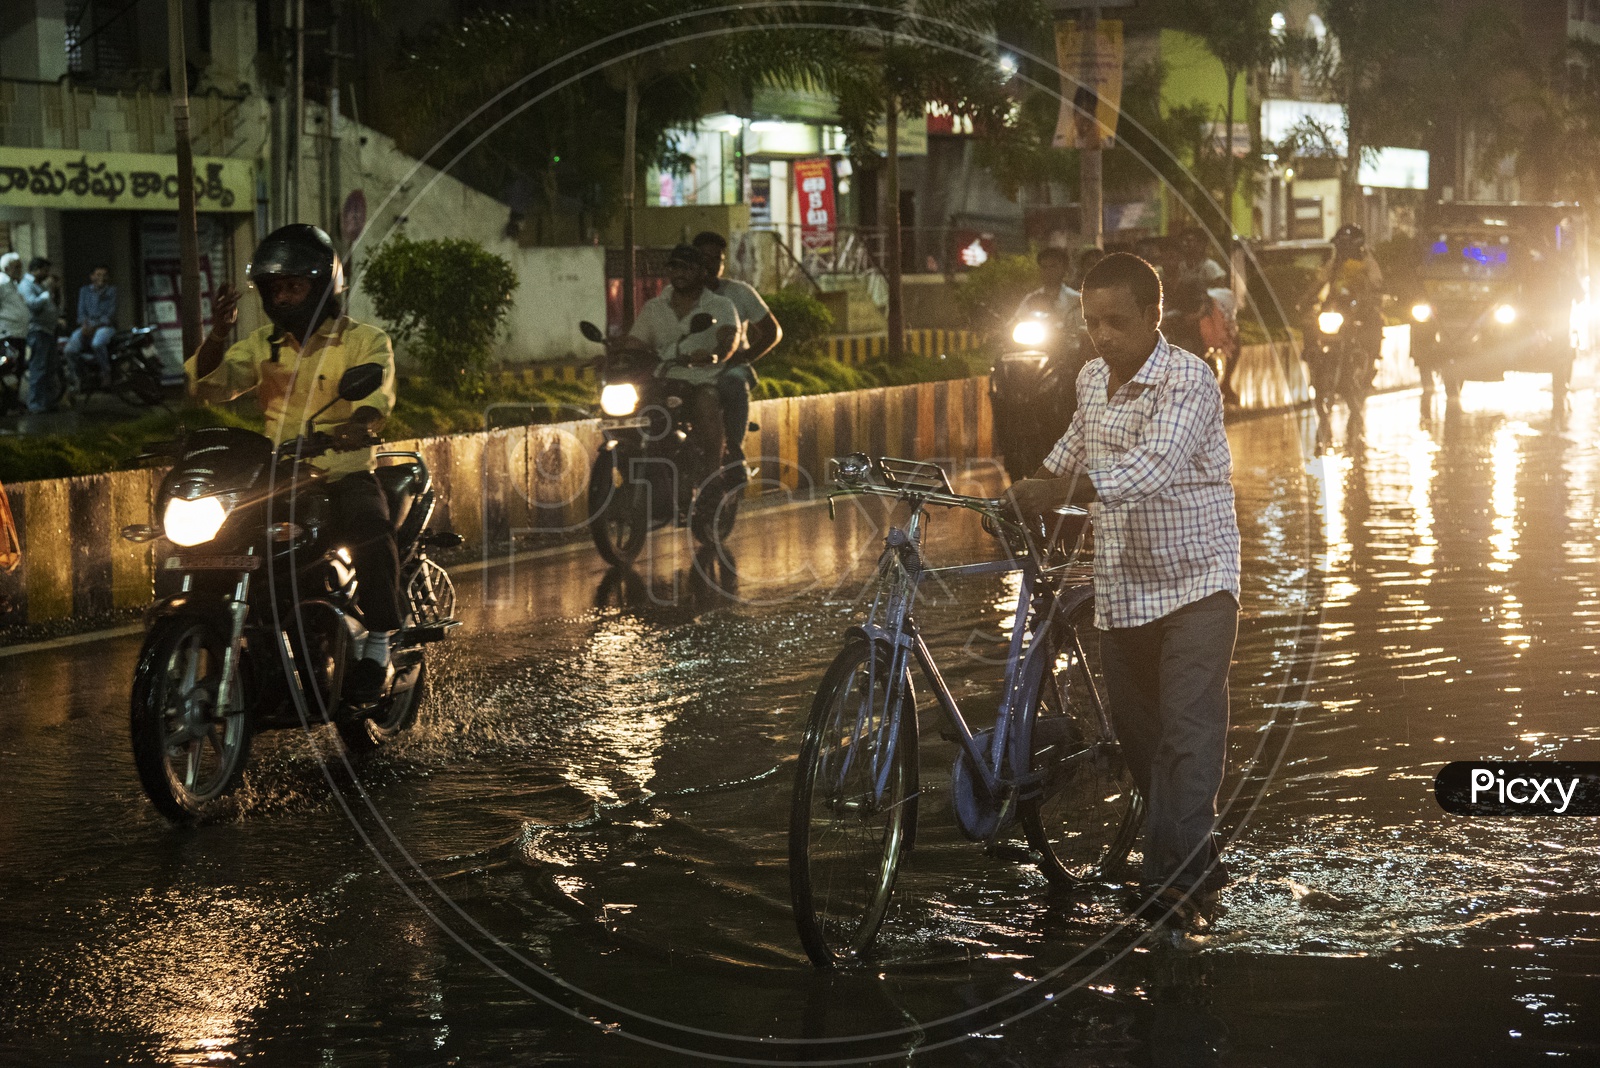 A man crosses a waterlogged road with a bicycle  in Vijayawada after a heavy rain on 03/05/18